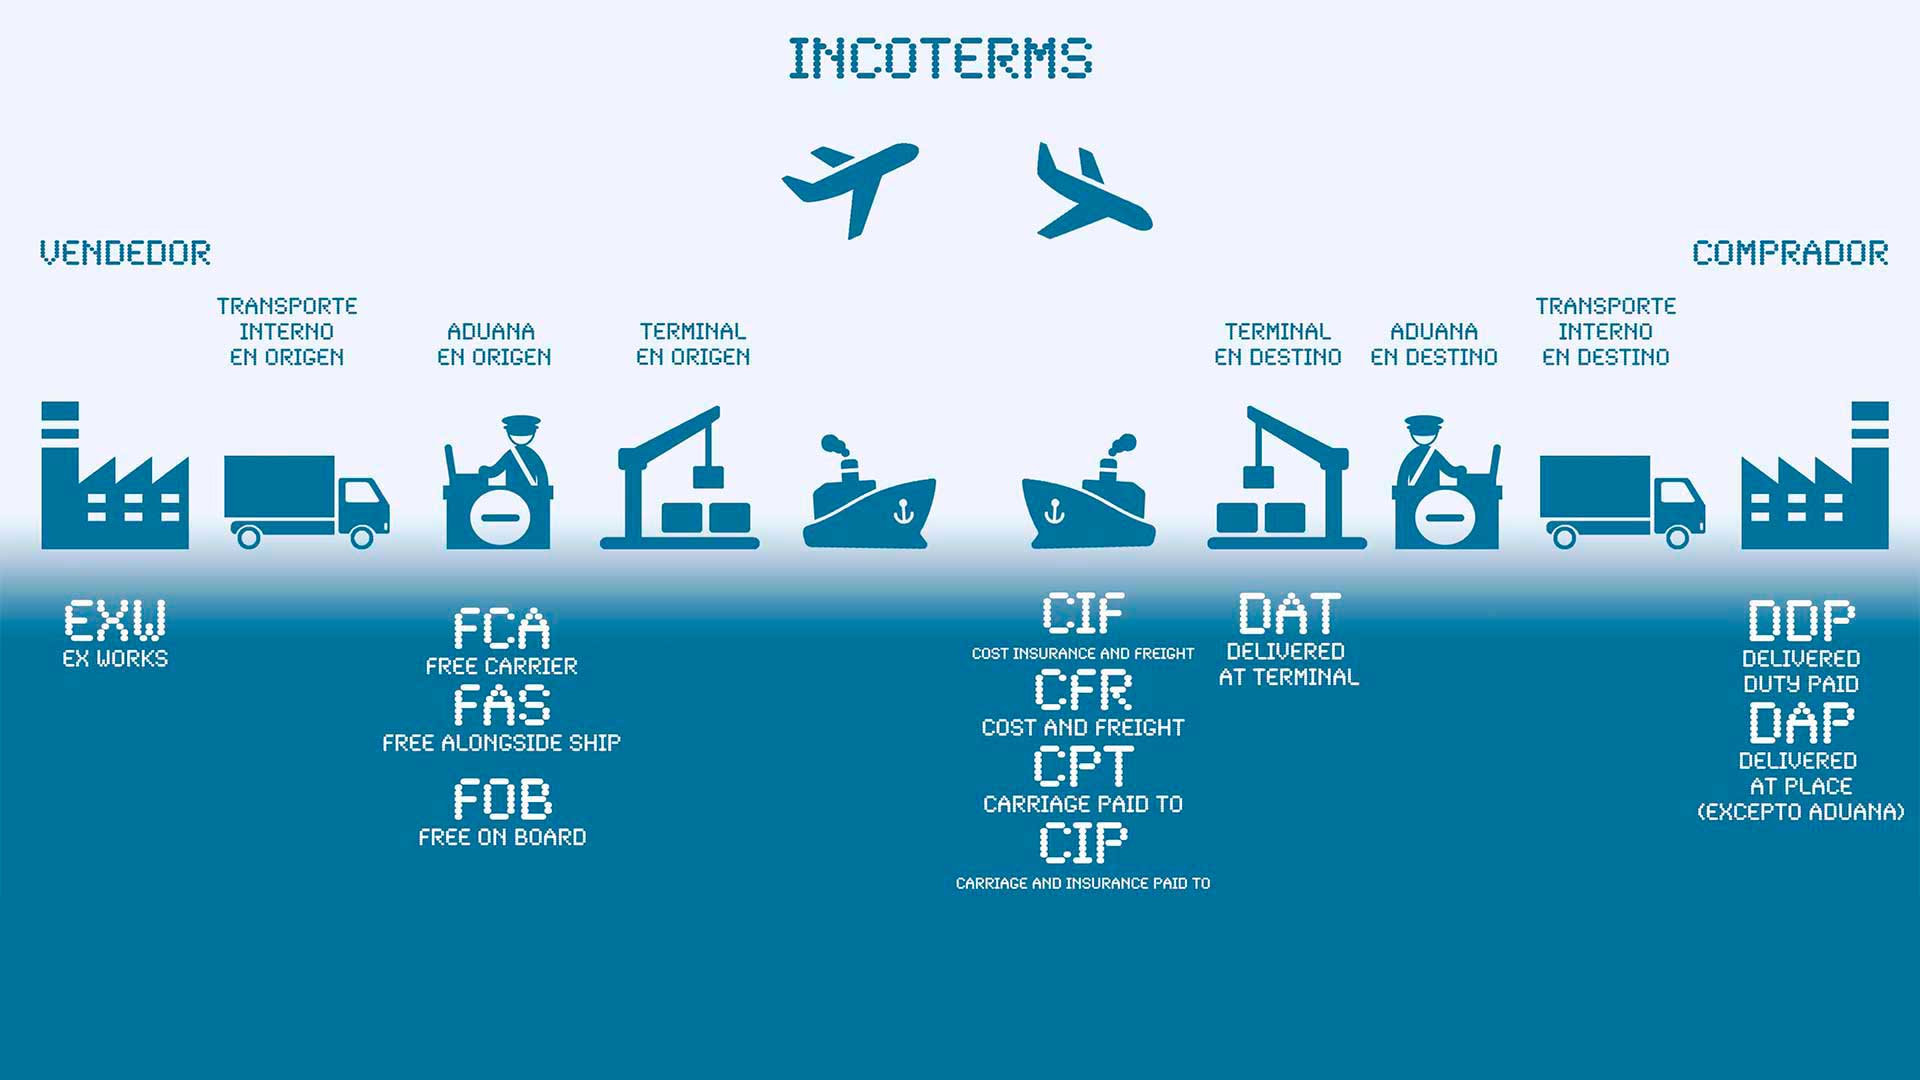  Incoterms